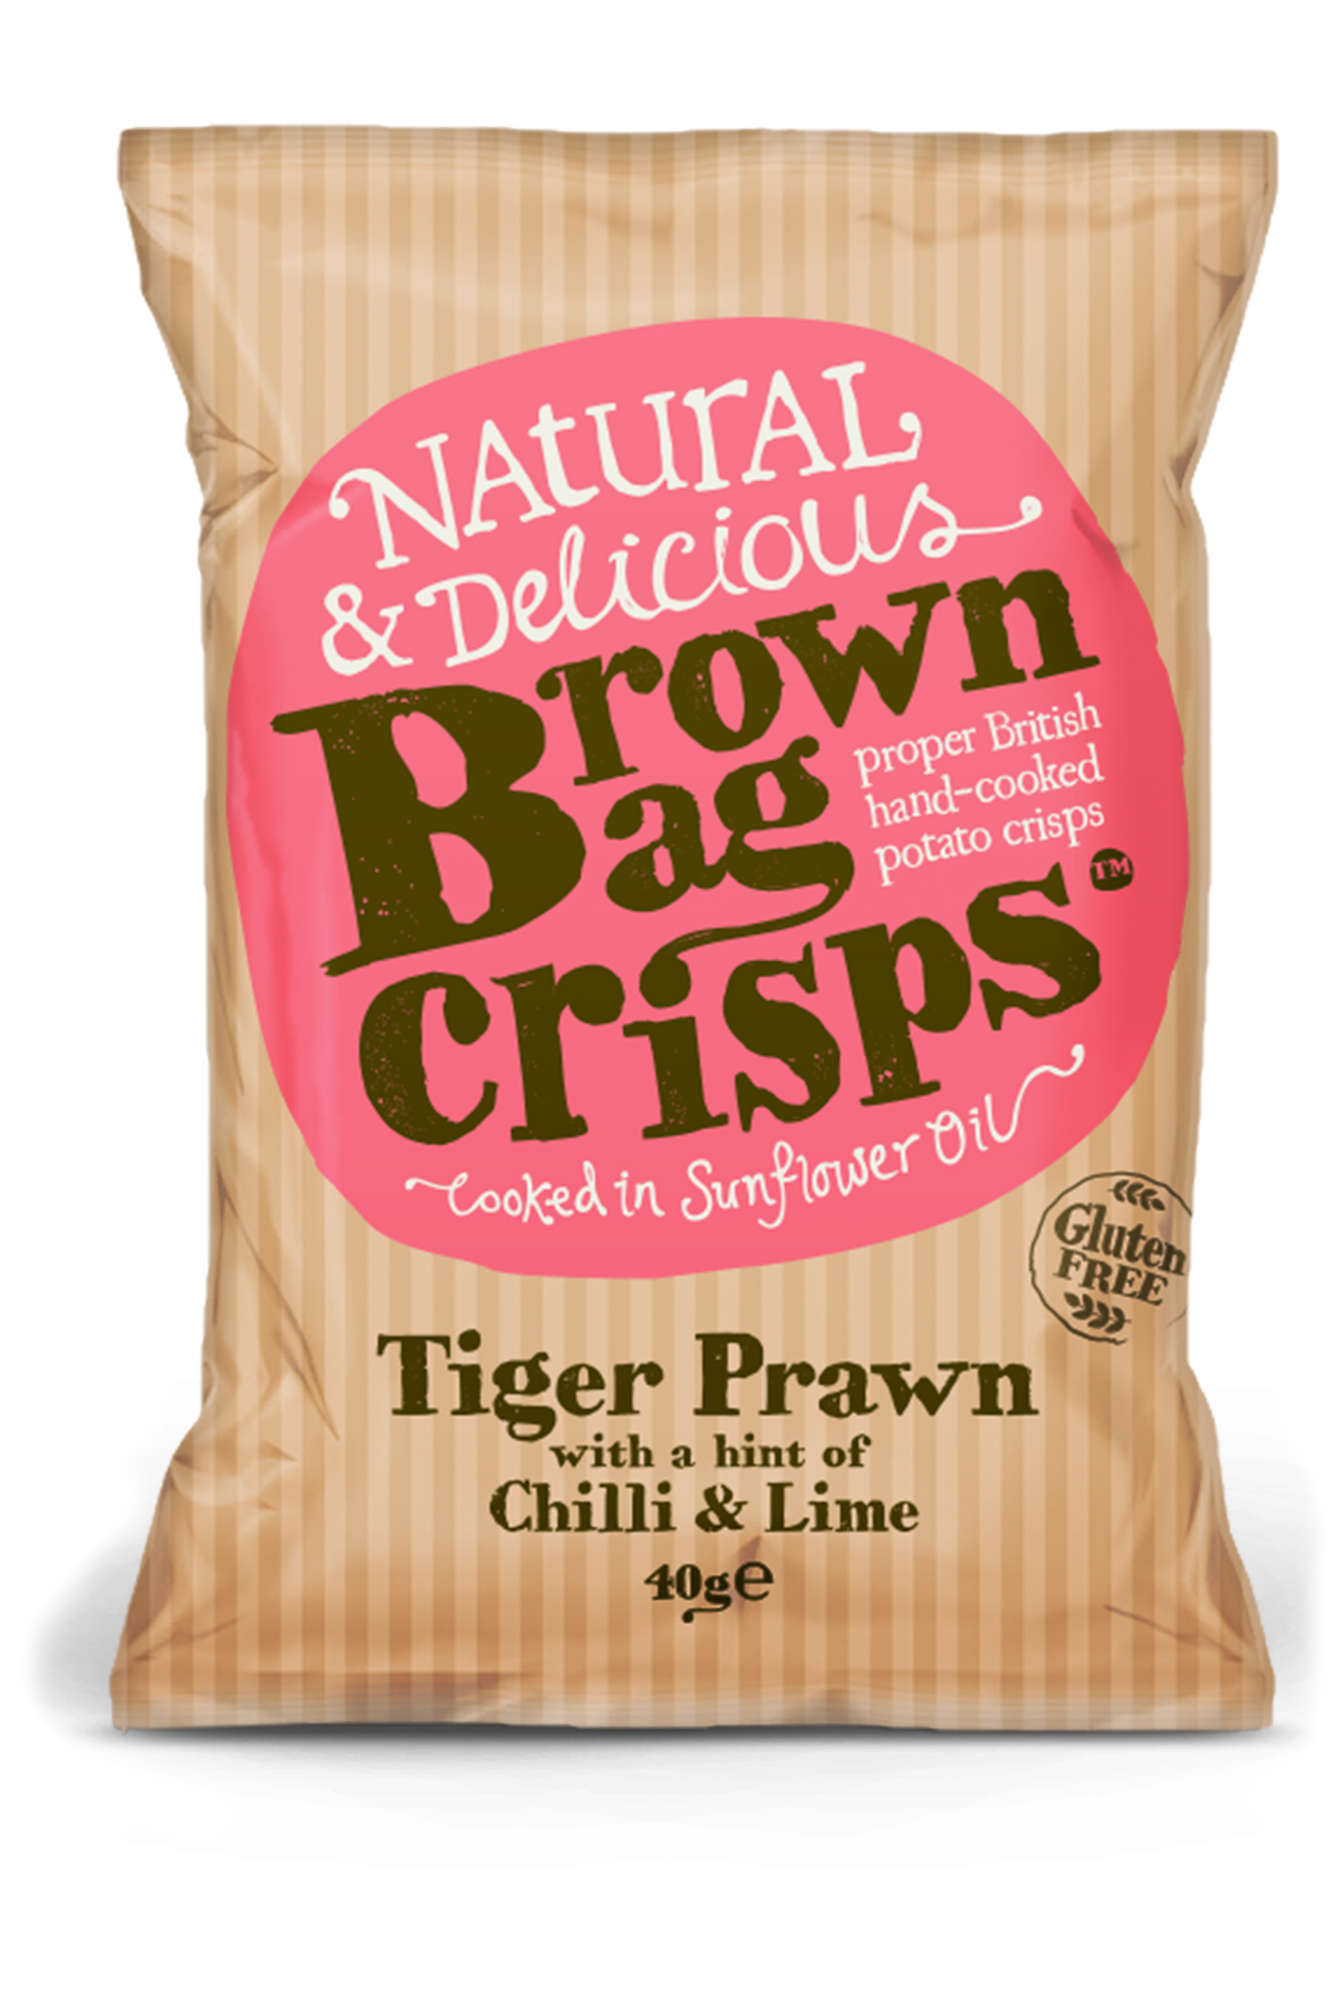 Brown Bag Crisps - Tiger Prawn with a hint of Chilli and Lime